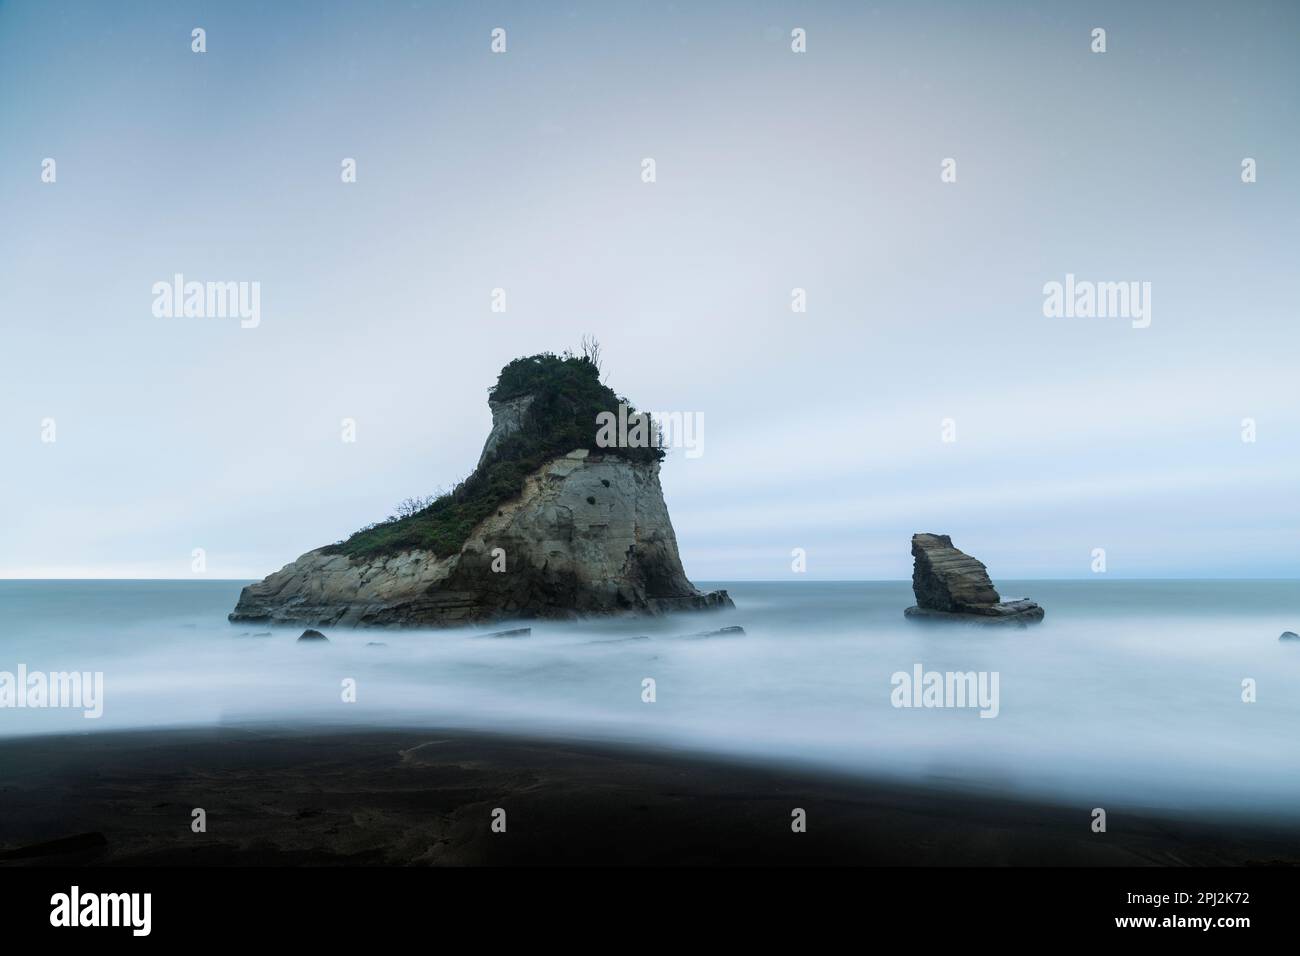 Long exposure shot of sea stacks in the water, Chiba Prefecture, Japan Stock Photo